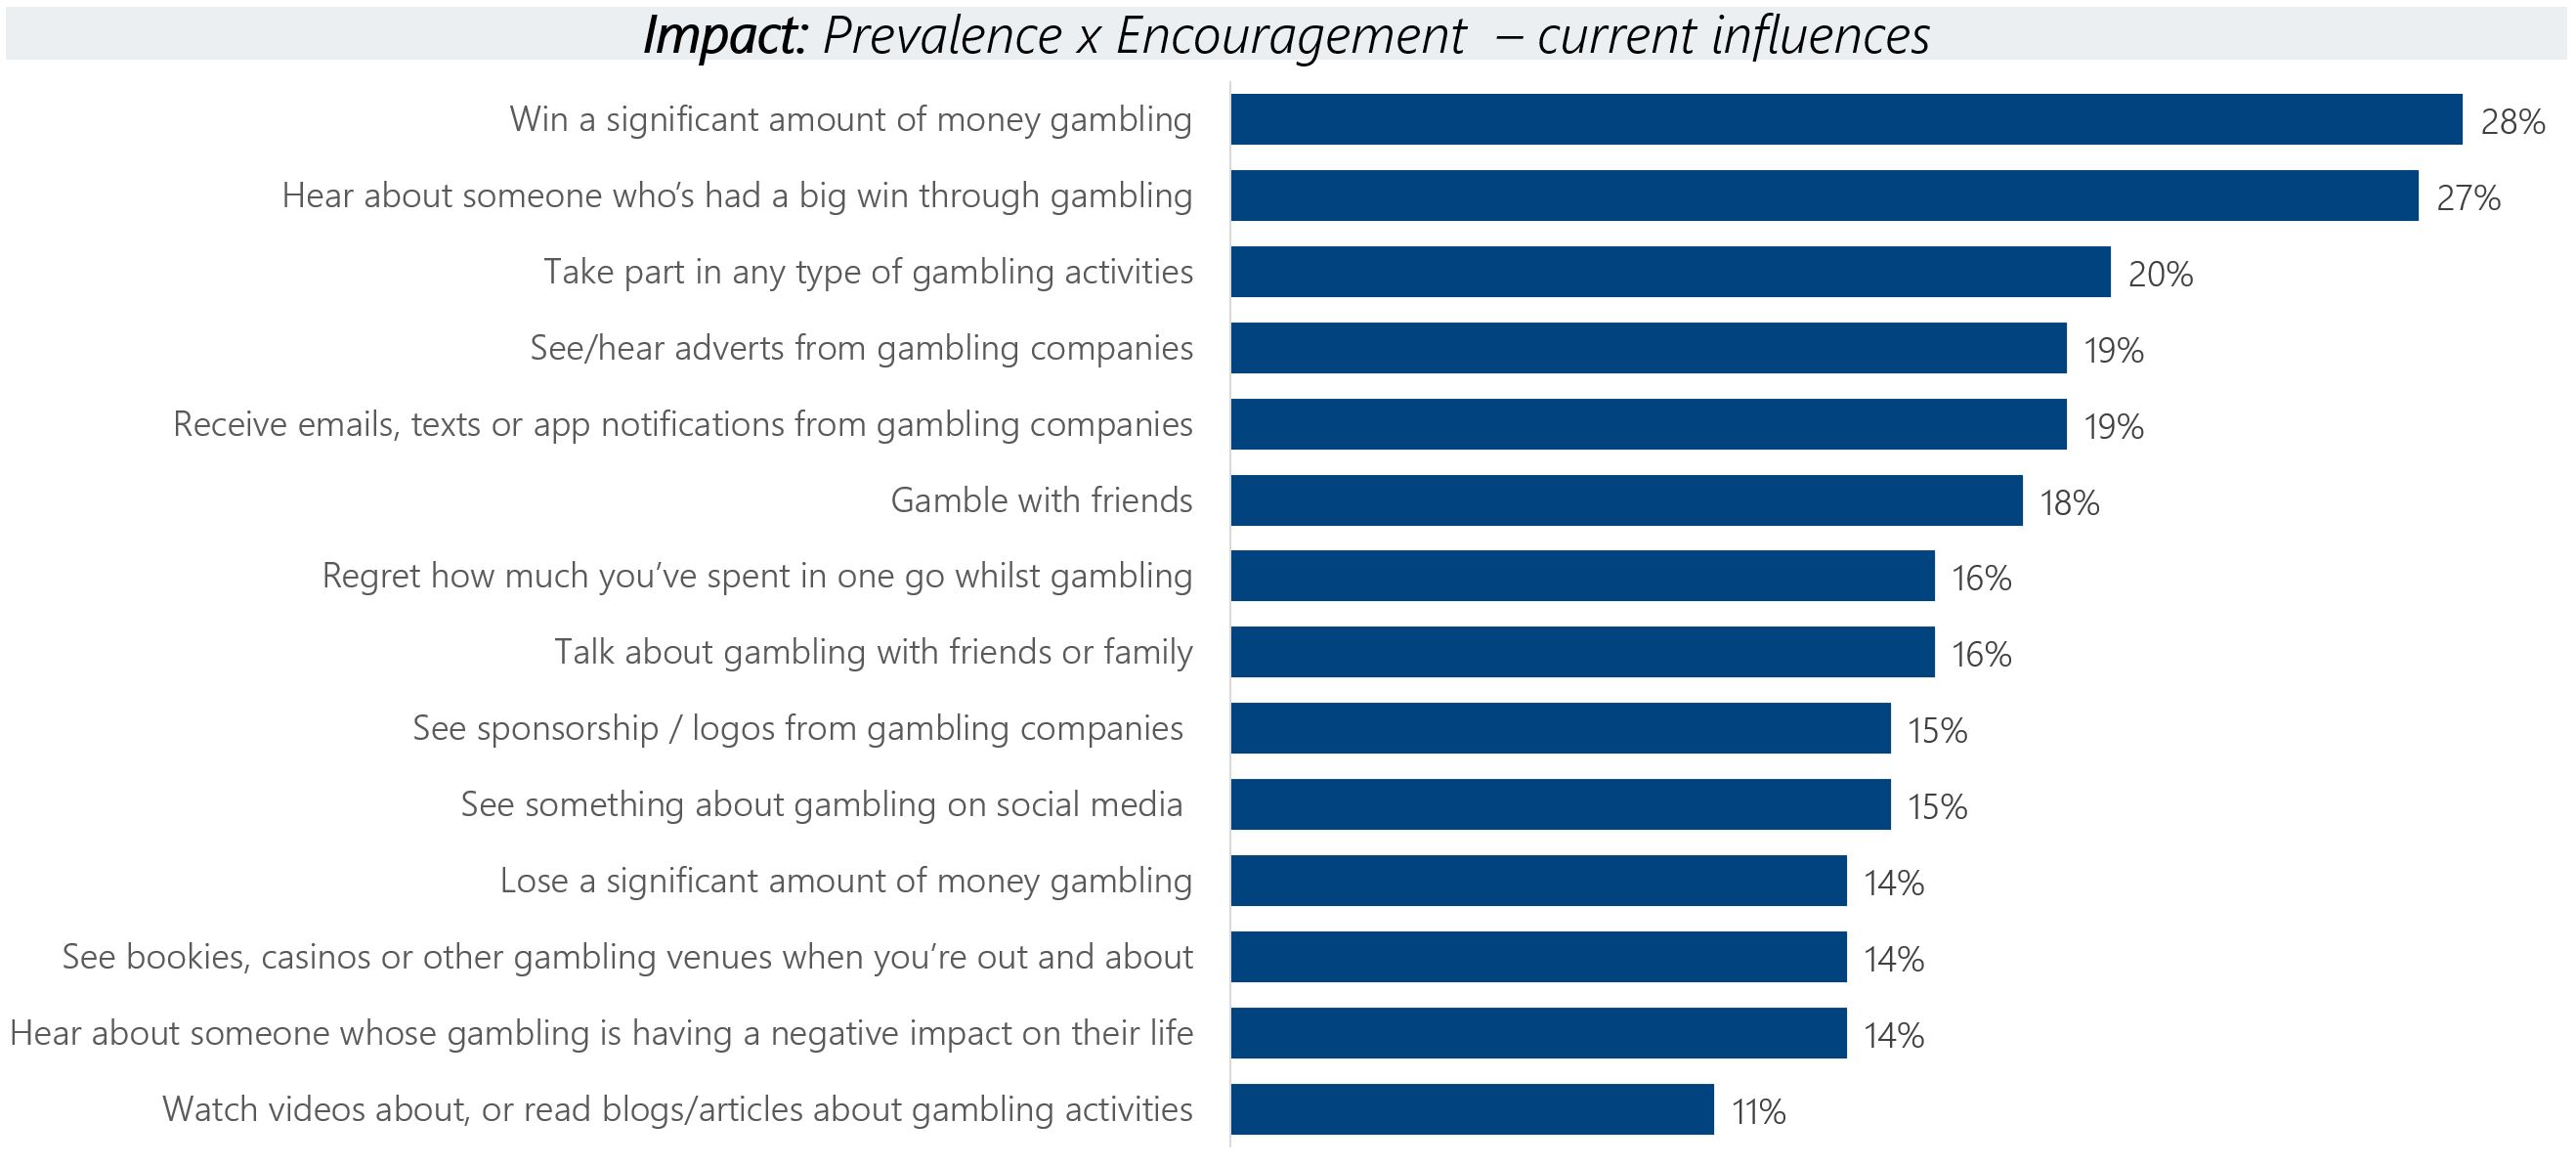 A chart showing the Impact Scores (calculated by Prevalence x Encouragement) of Passive Influence factors. Data from the chart is provided within the following table.